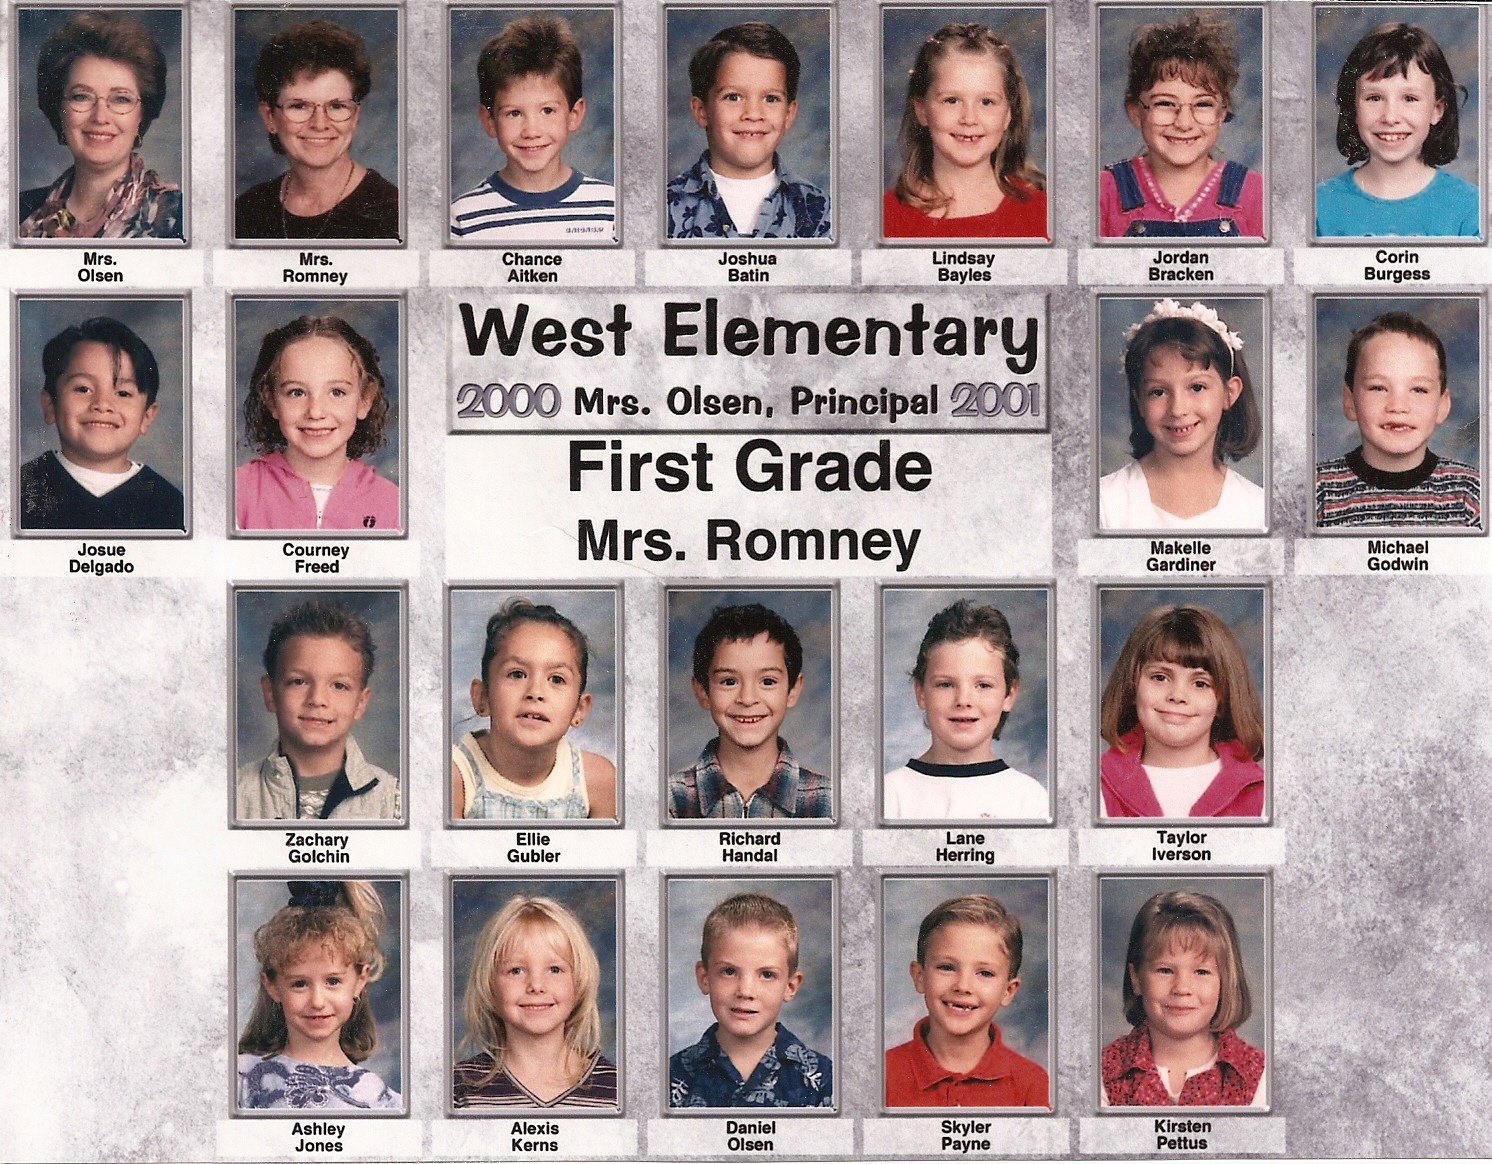 Mrs. Romney's 2000-2001 first grade class at West Elementary School